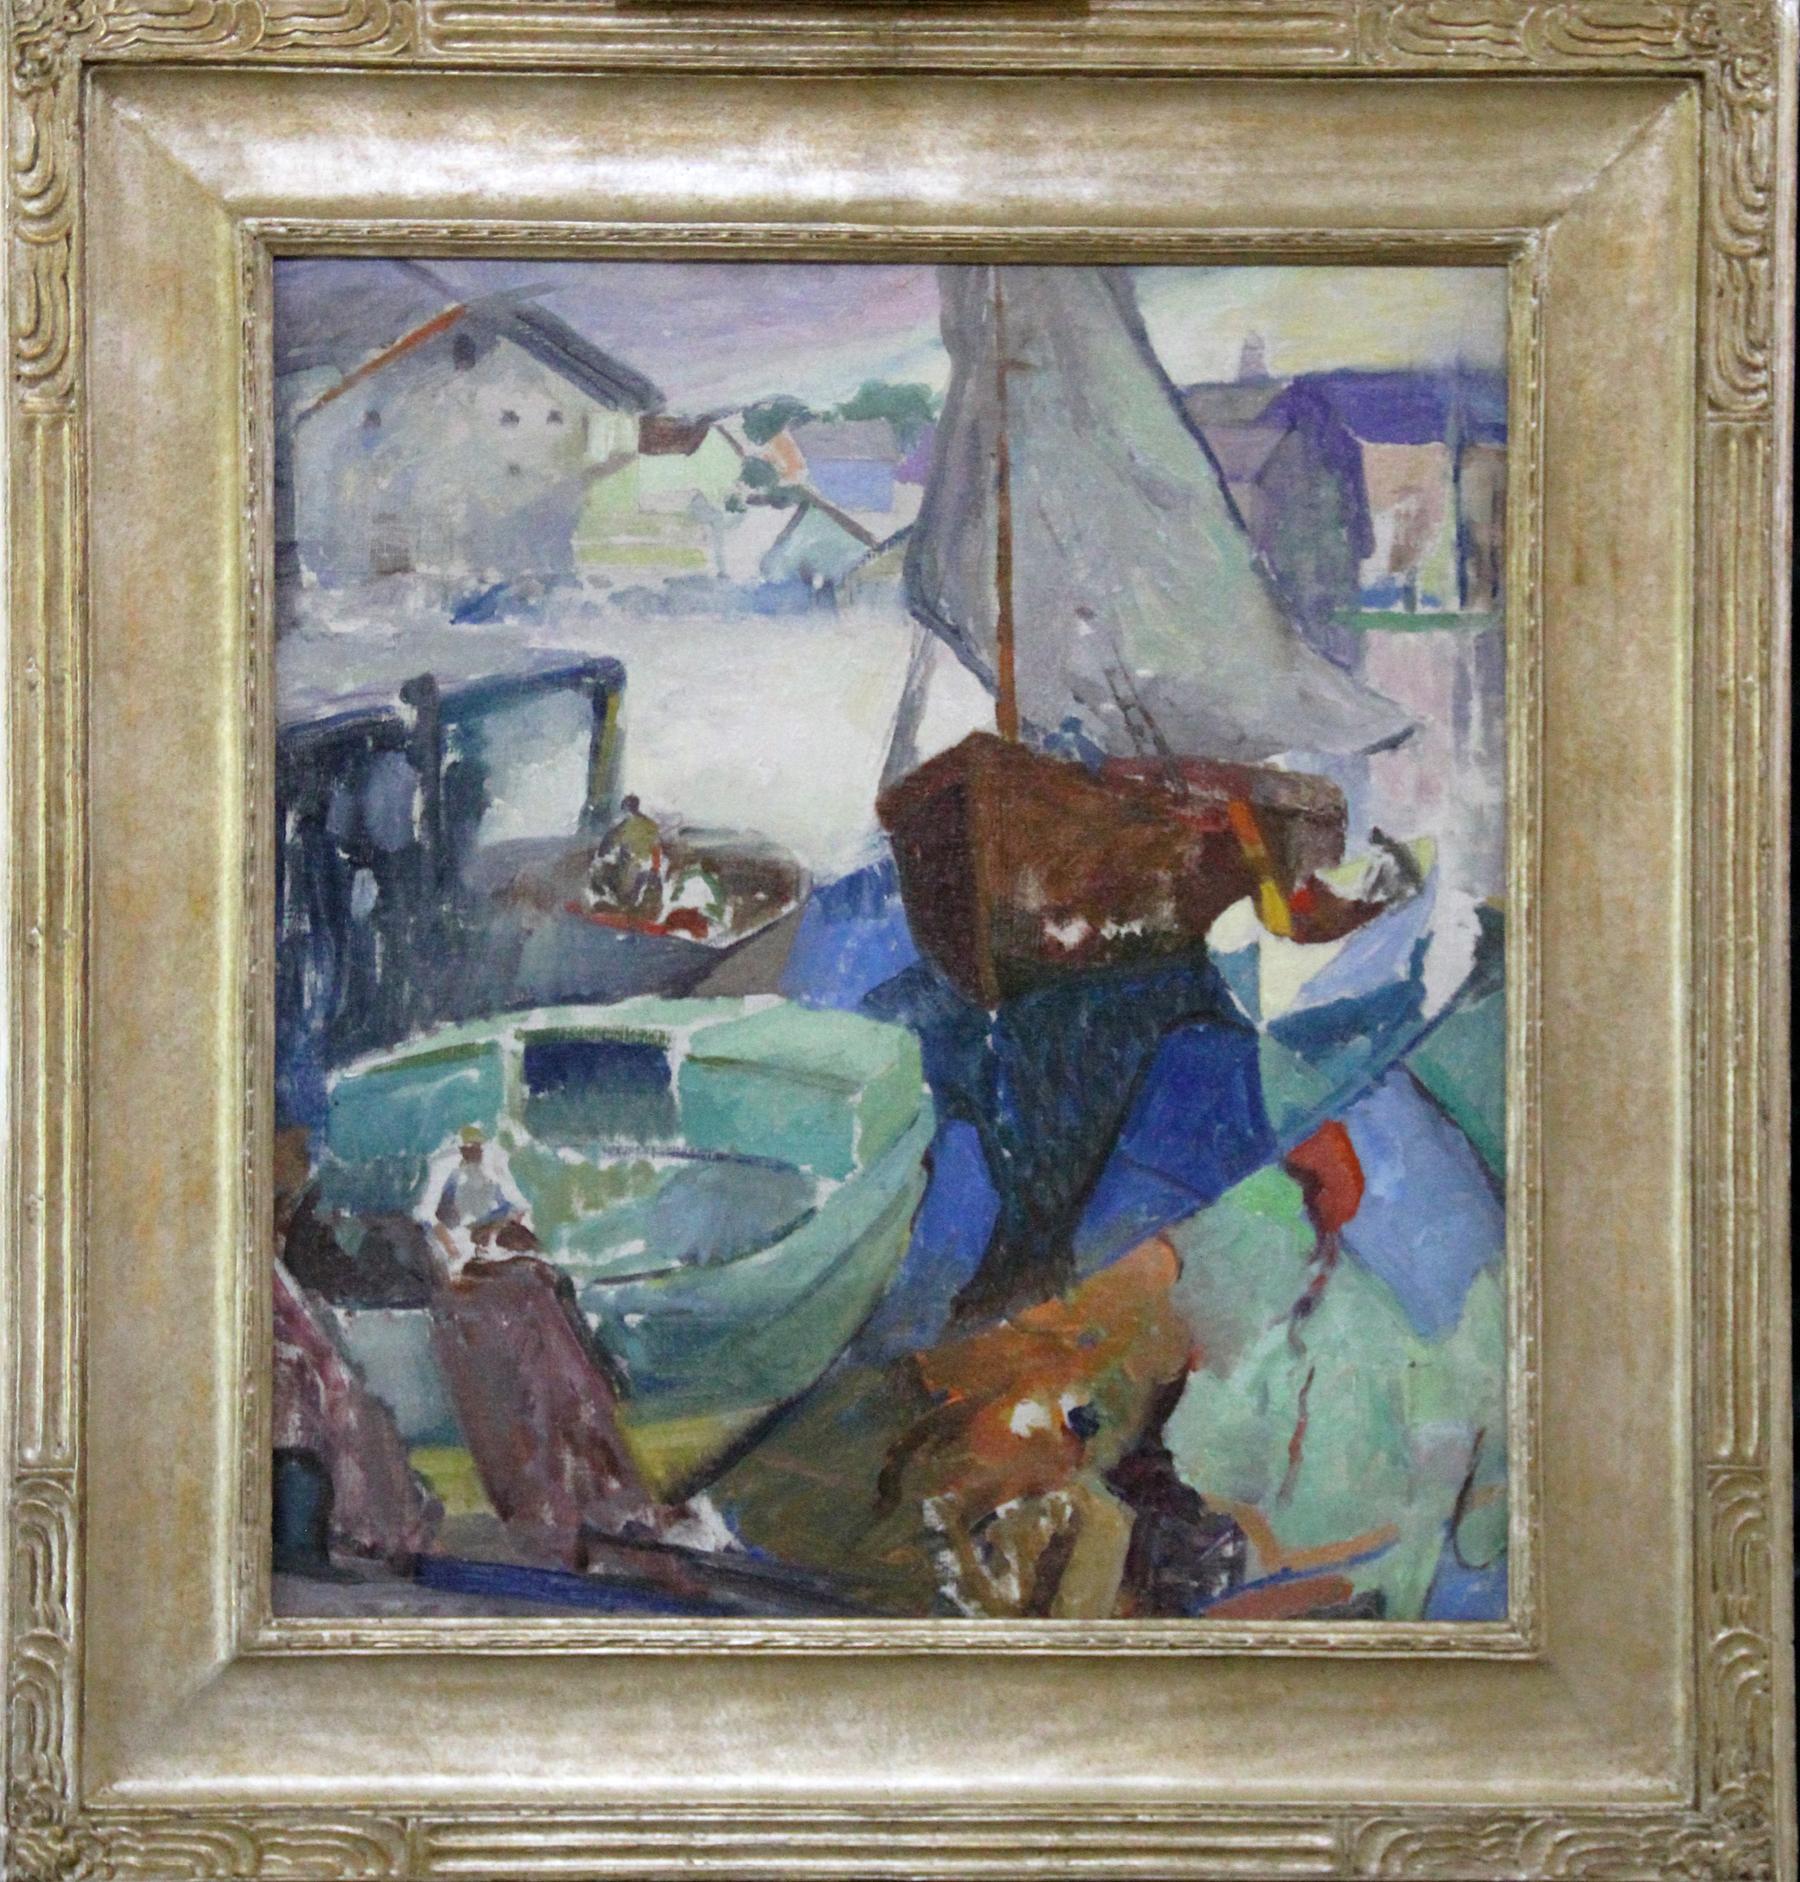 "Return of the Fishing Boat" by Hugh Breckenridge is a early 20th century modernist abstract harbor scene. The painting comes from a private collection in California and is signed "Hugh Breckenridge" on verso. Additional shipping options and quotes